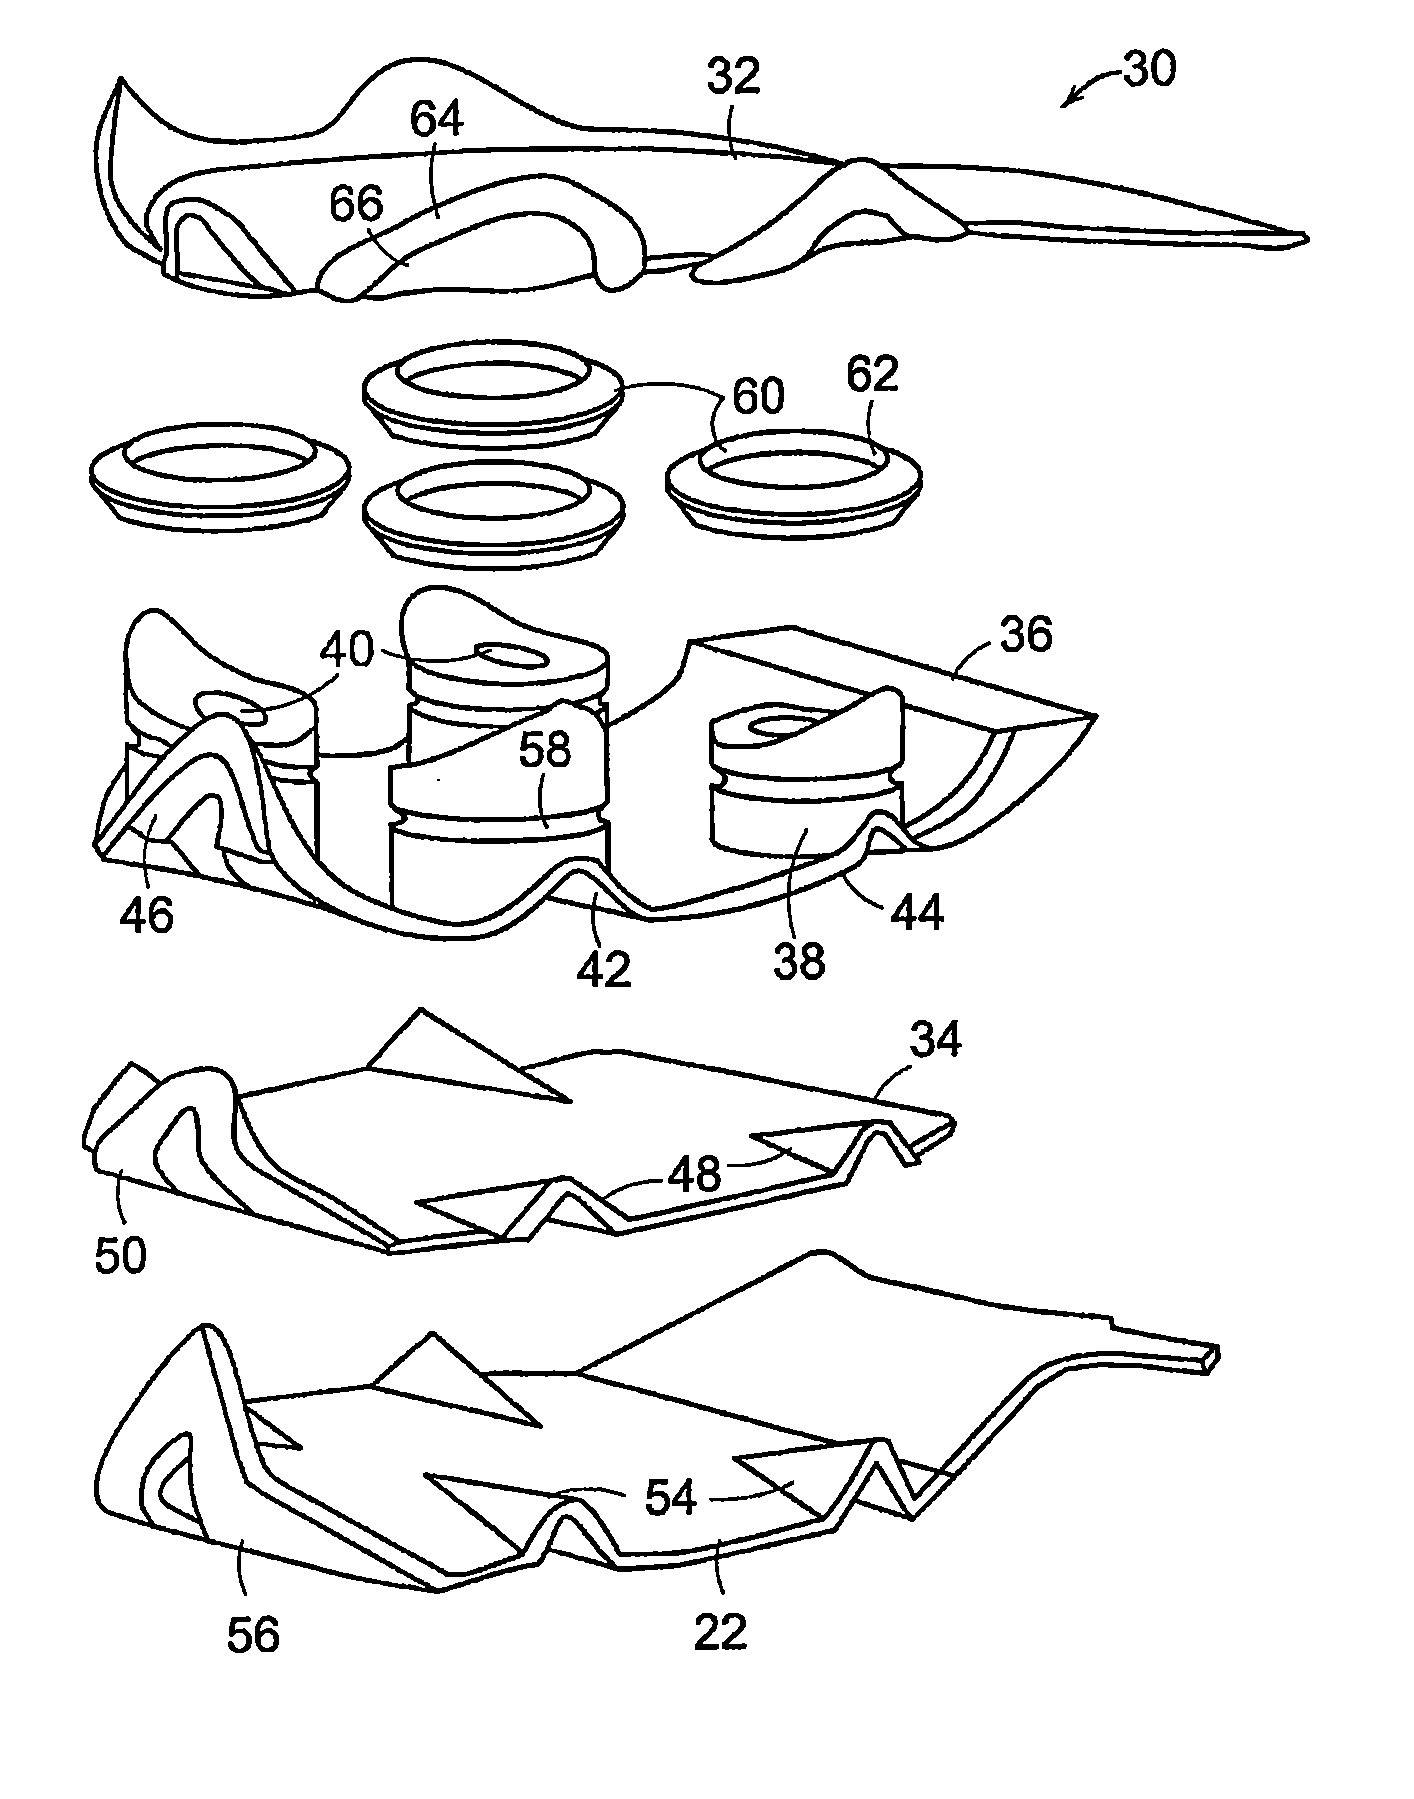 Article of footwear with support assembly having plate and indentations formed therein